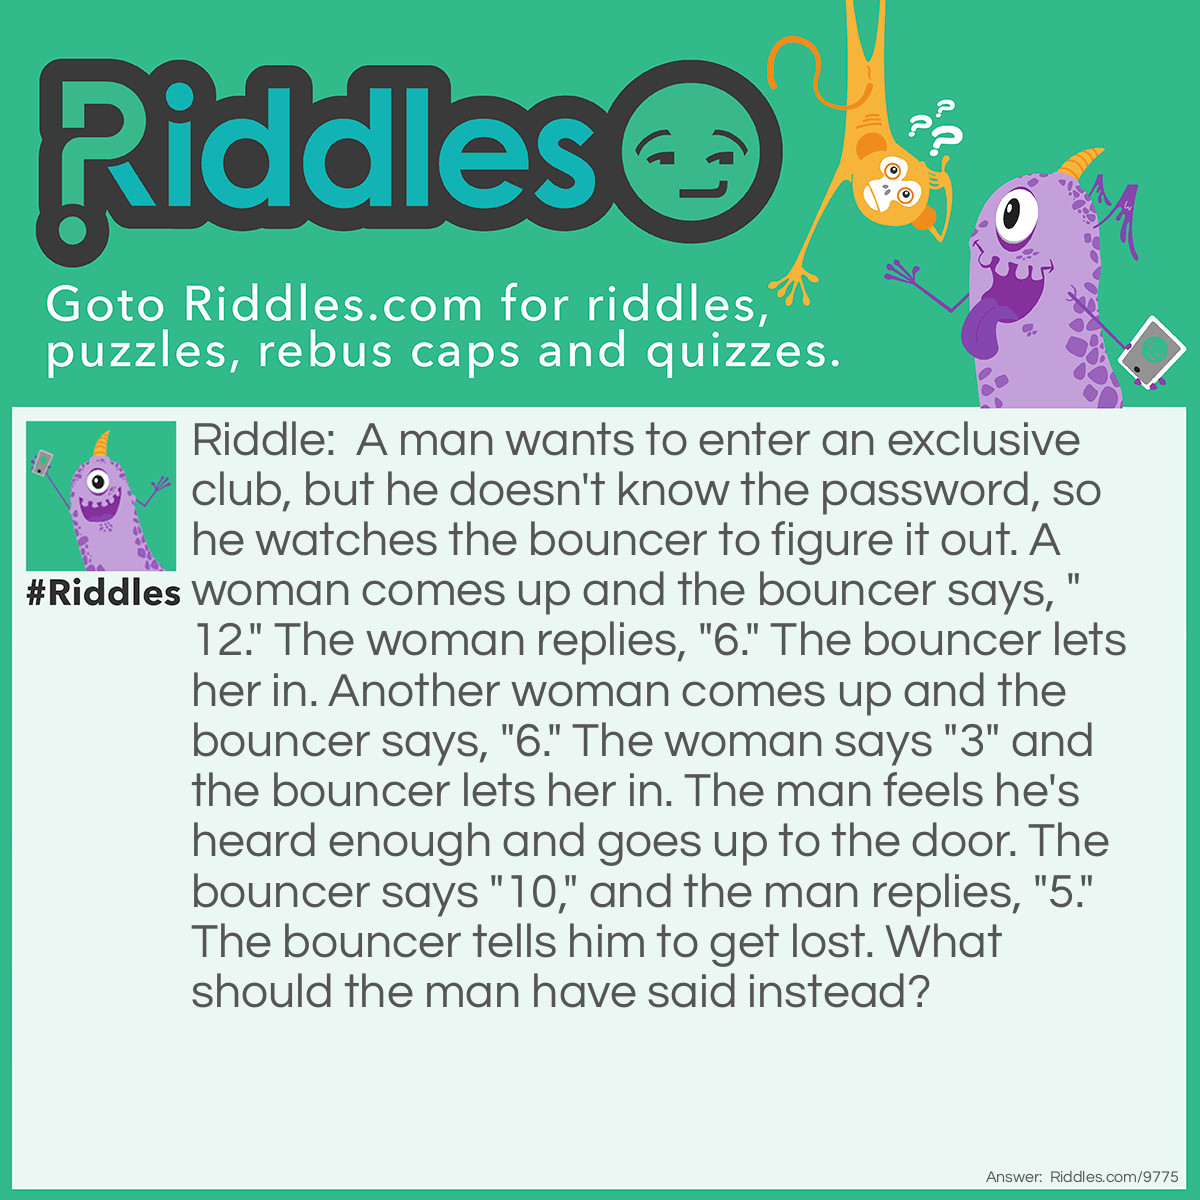 Riddle: A man wants to enter an exclusive club, but he doesn't know the password, so he watches the bouncer to figure it out. A woman comes up and the bouncer says, "12." The woman replies, "6." The bouncer lets her in. Another woman comes up and the bouncer says, "6." The woman says "3" and the bouncer lets her in. The man feels he's heard enough and goes up to the door. The bouncer says "10," and the man replies, "5." The bouncer tells him to get lost. What should the man have said instead? Answer: : 3 — the number of letters in the word "ten."